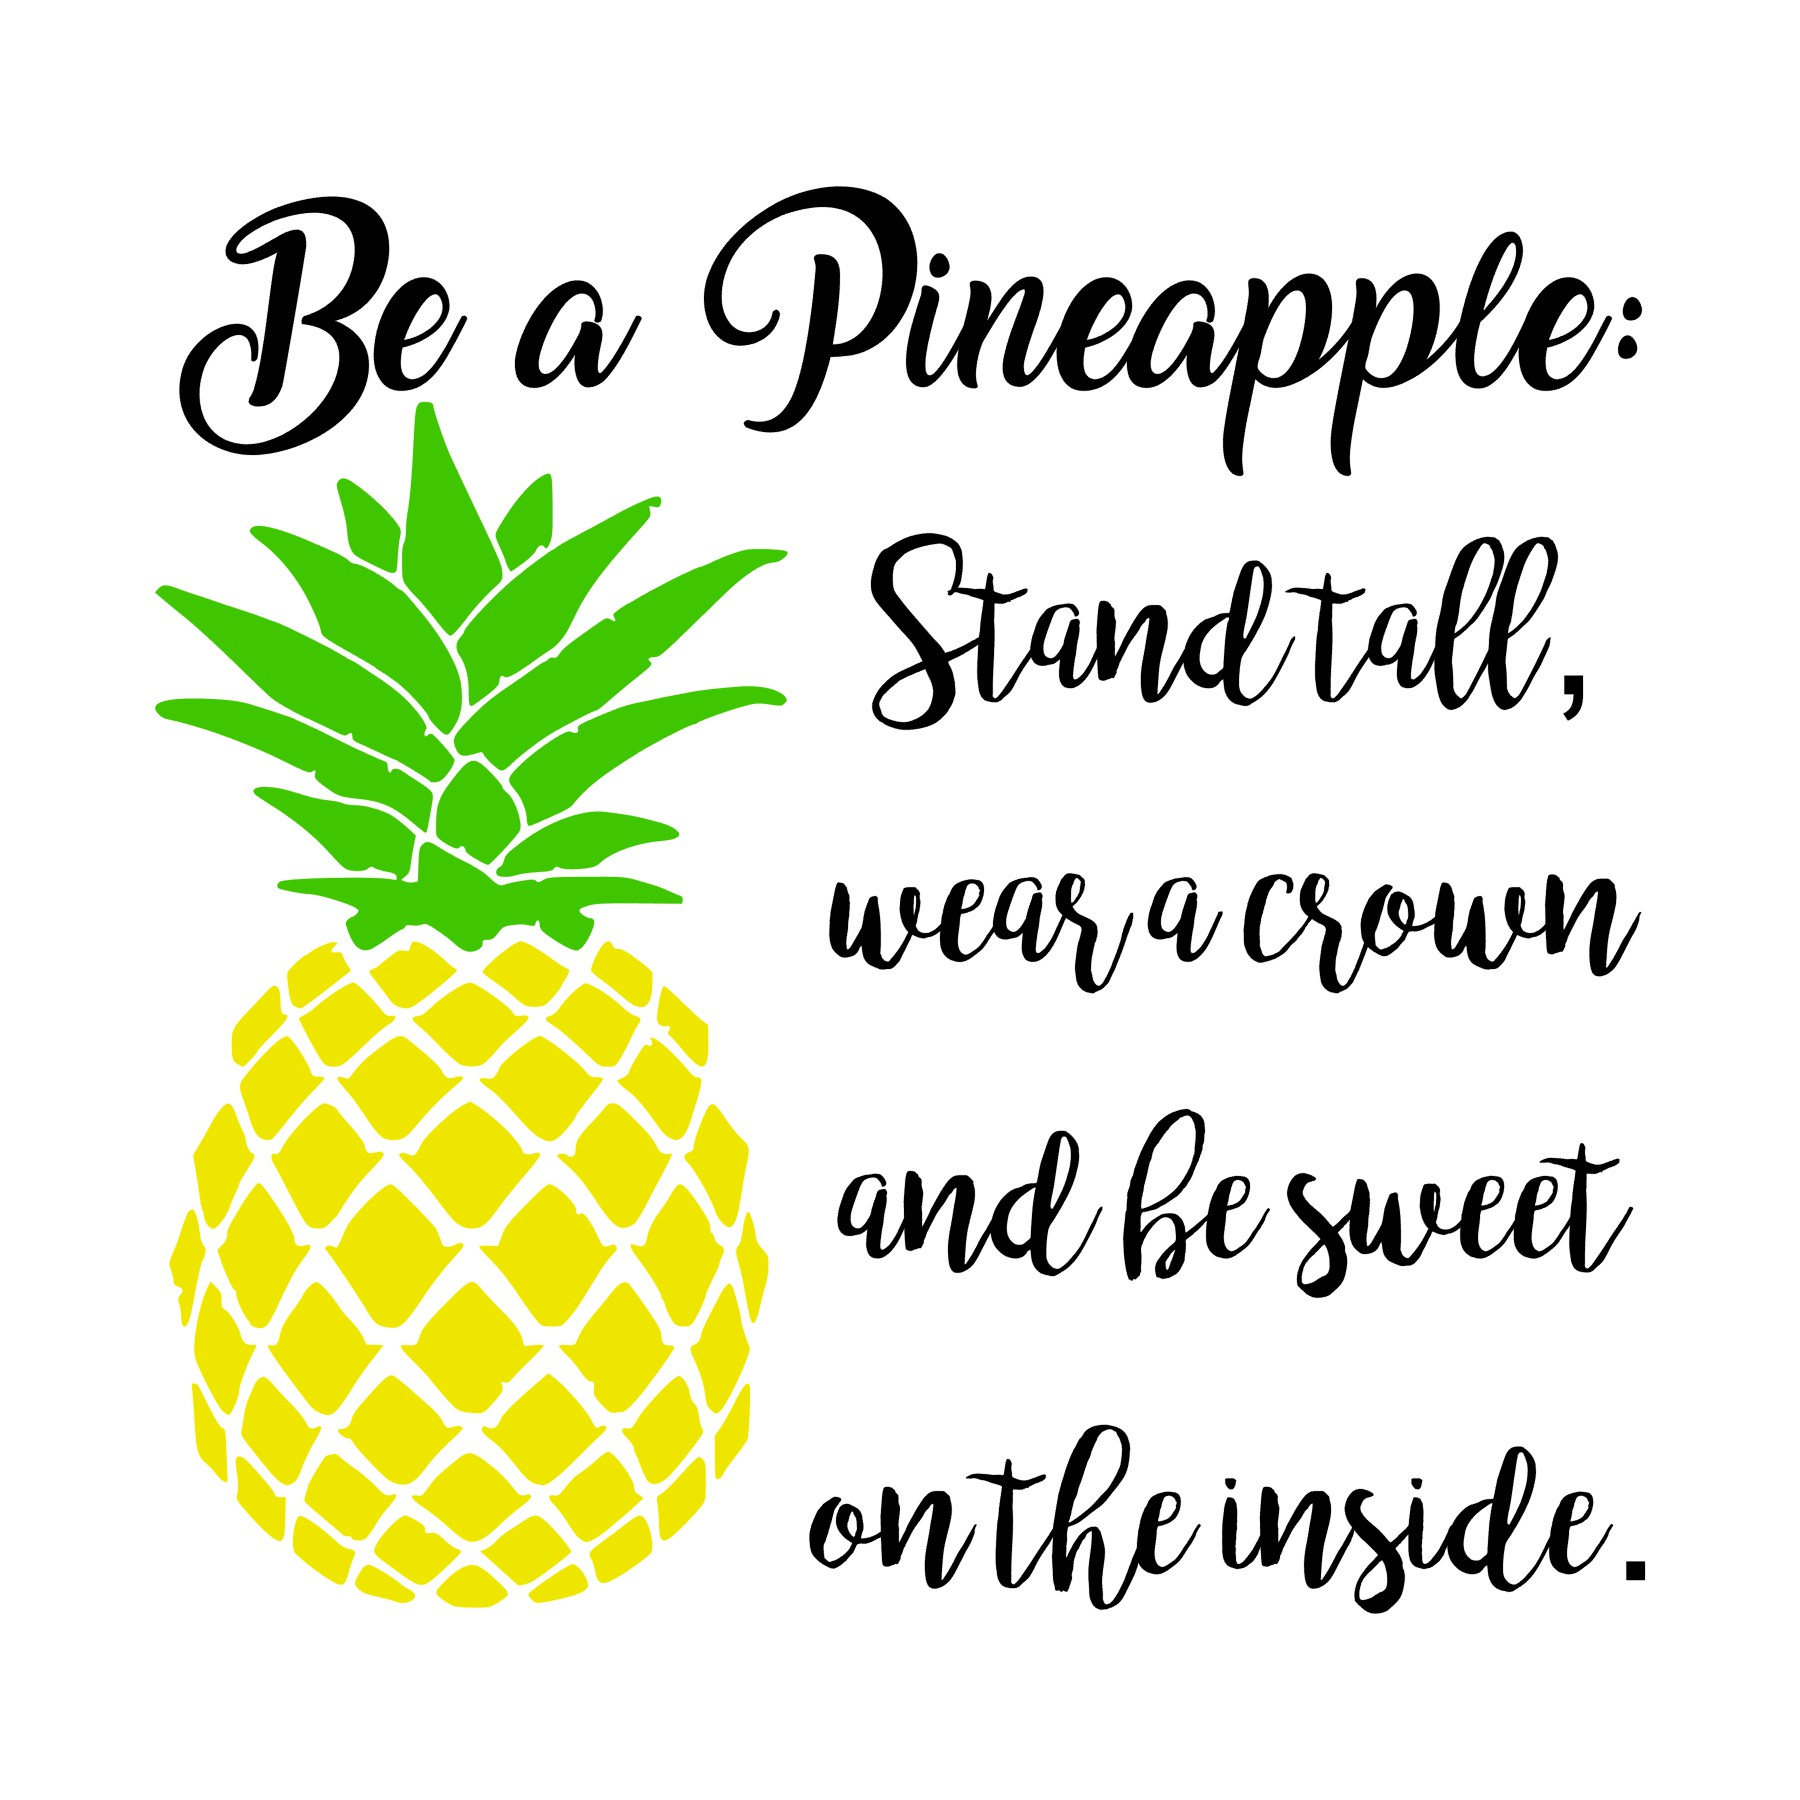 Download Be a Pineapple SVG Cut File Cutting File Pineapple Cut | Etsy